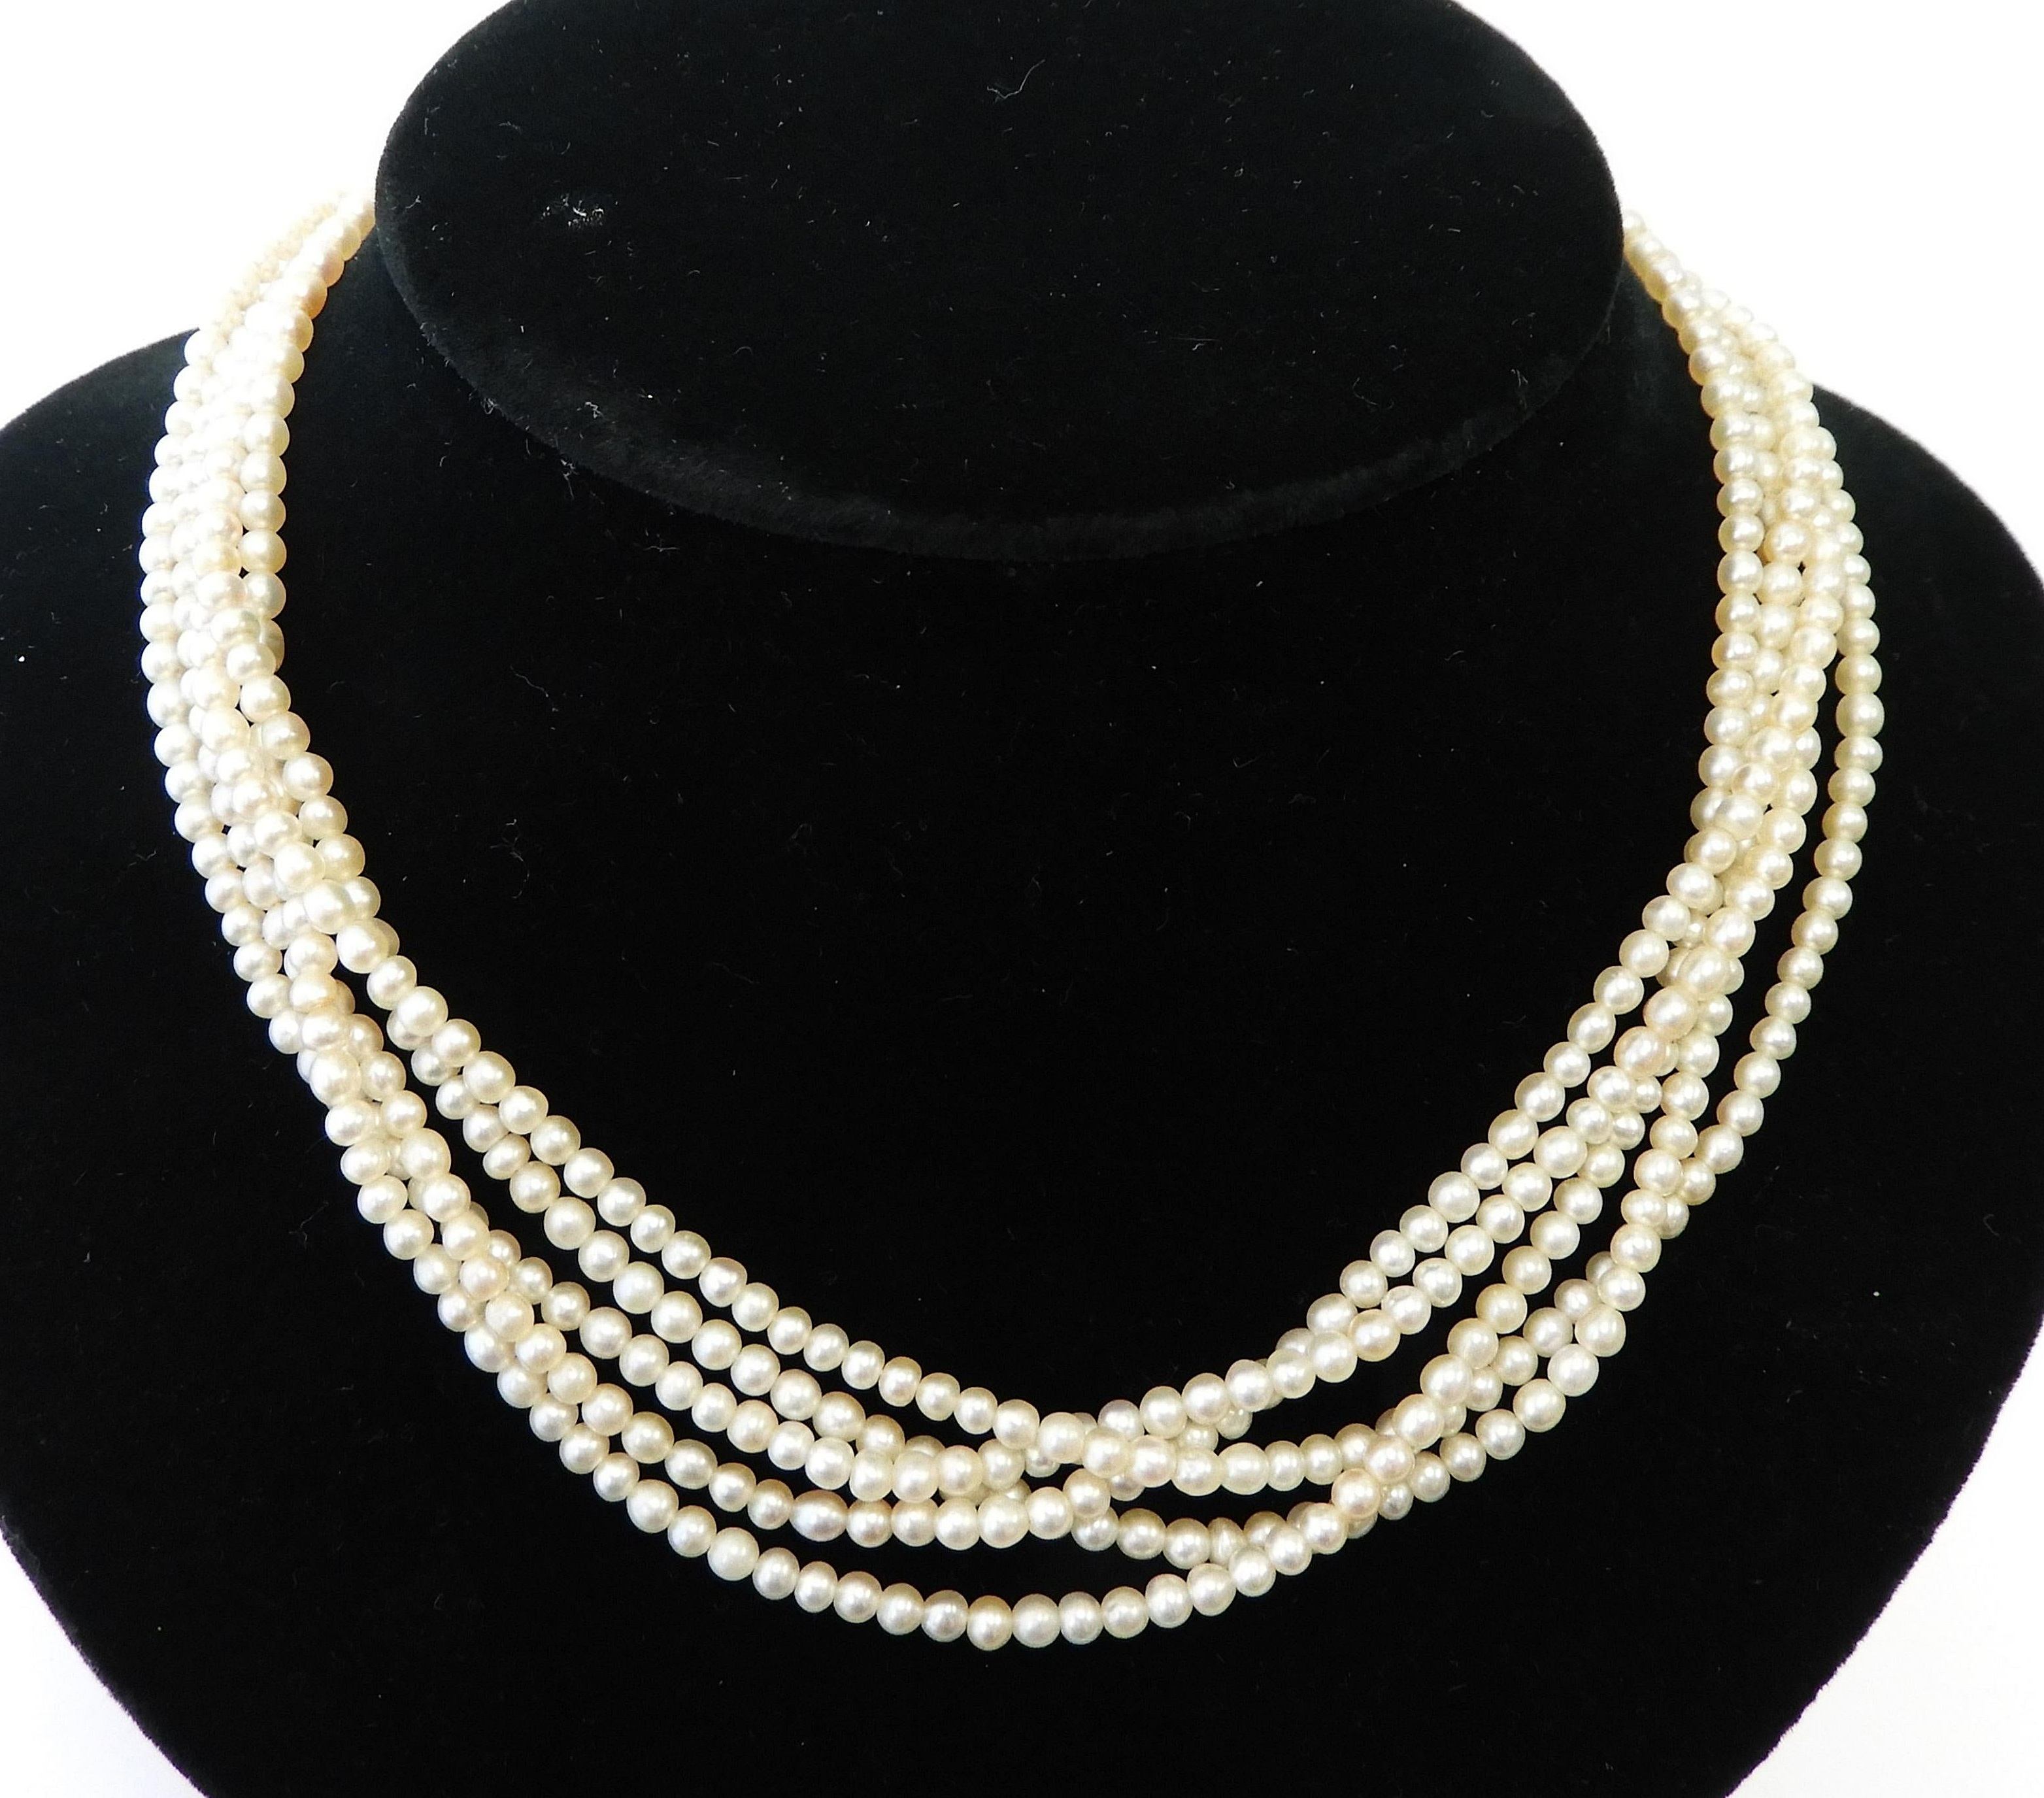 8. Lot 90. 5-strand Natural Pearl Necklace With Diamond Clasp. Sold For $8,775 ($800-1,200)